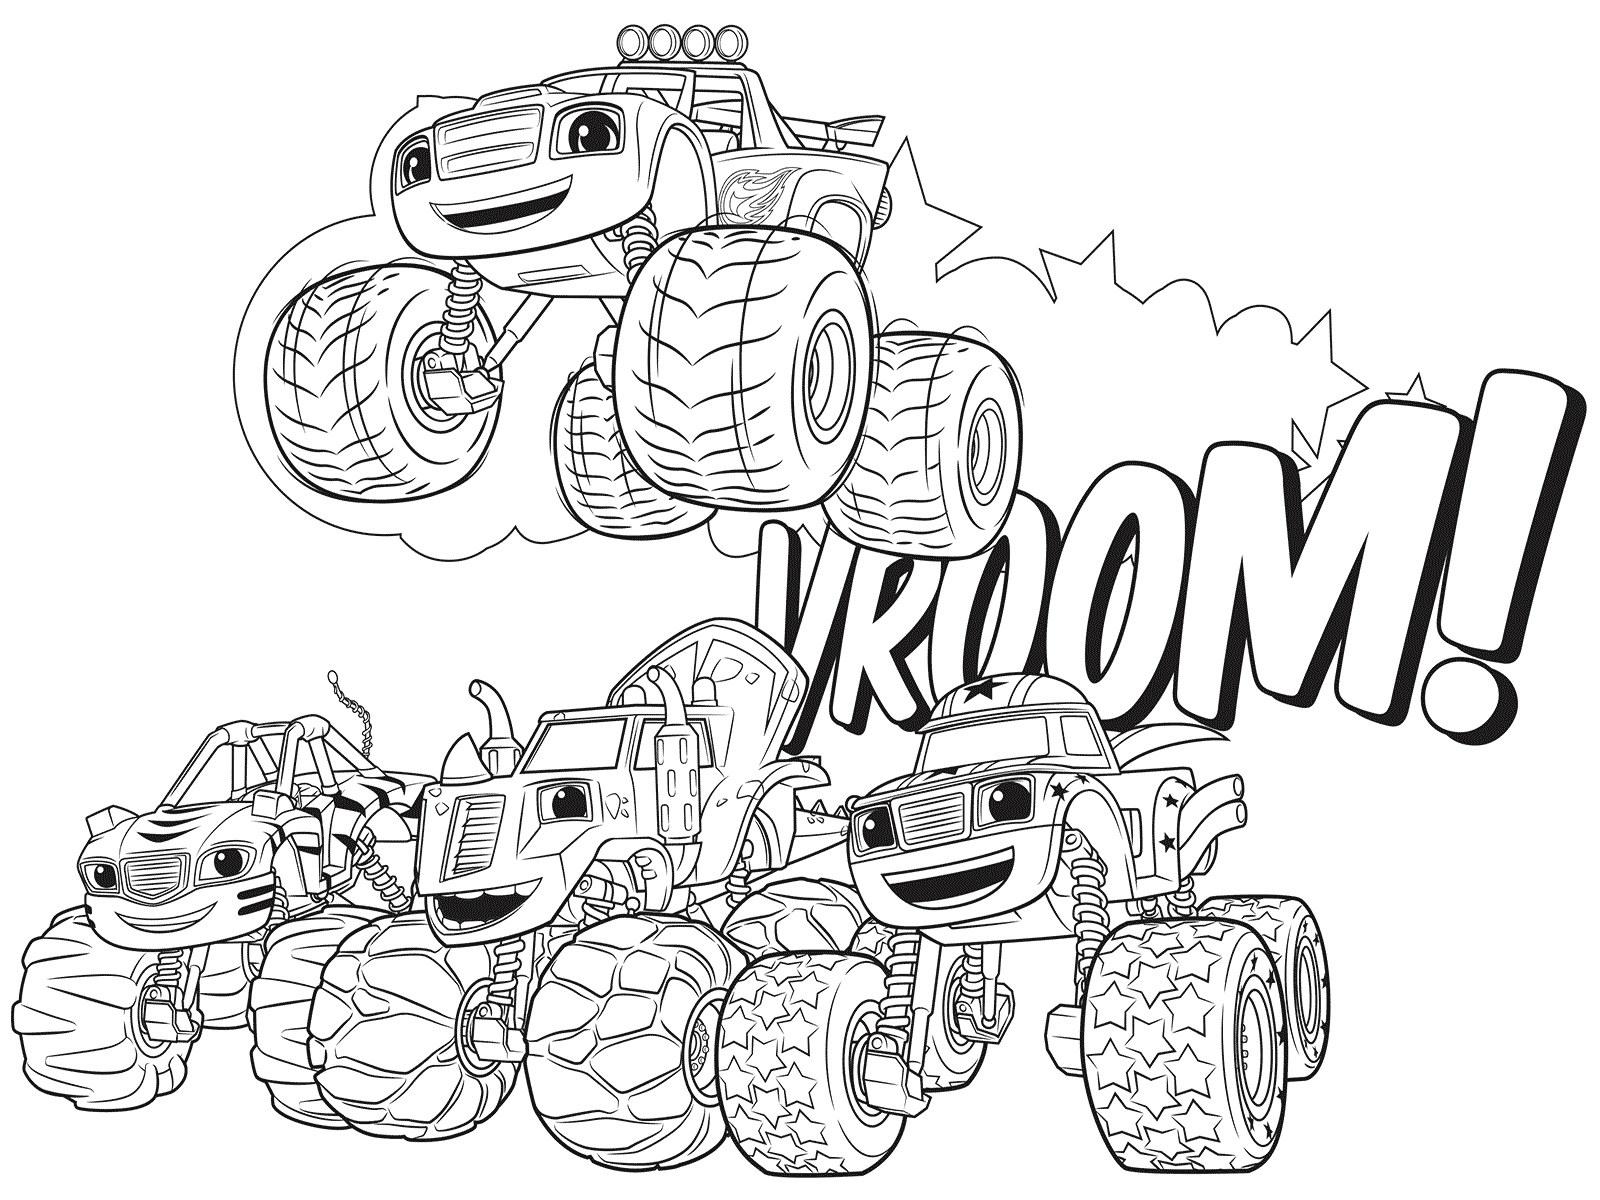 blaze-and-the-monster-machines-coloring-pages-best-coloring-pages-for